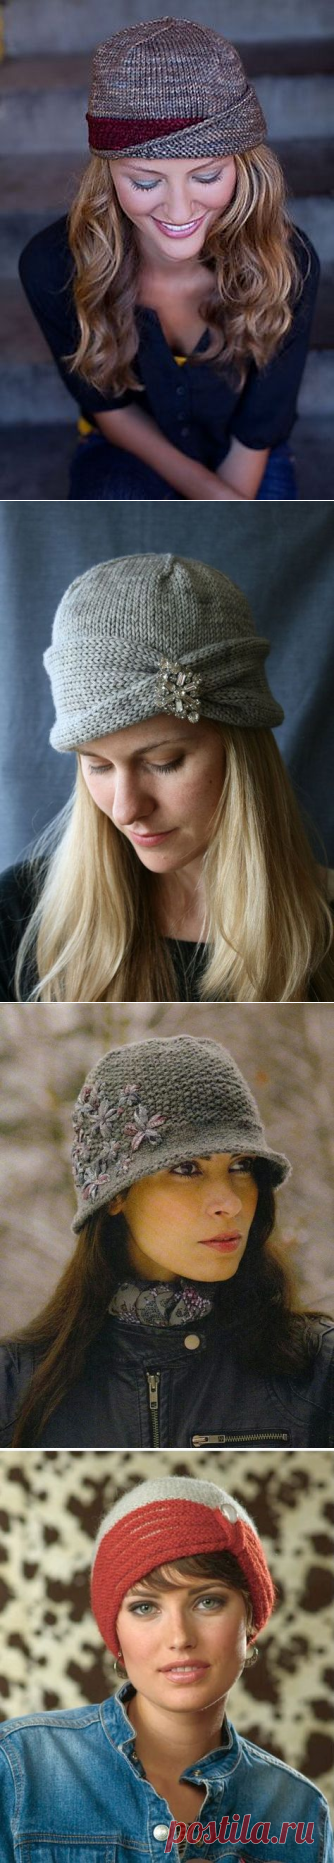 Ravelry: Lucy Hat pattern by C.идеи.